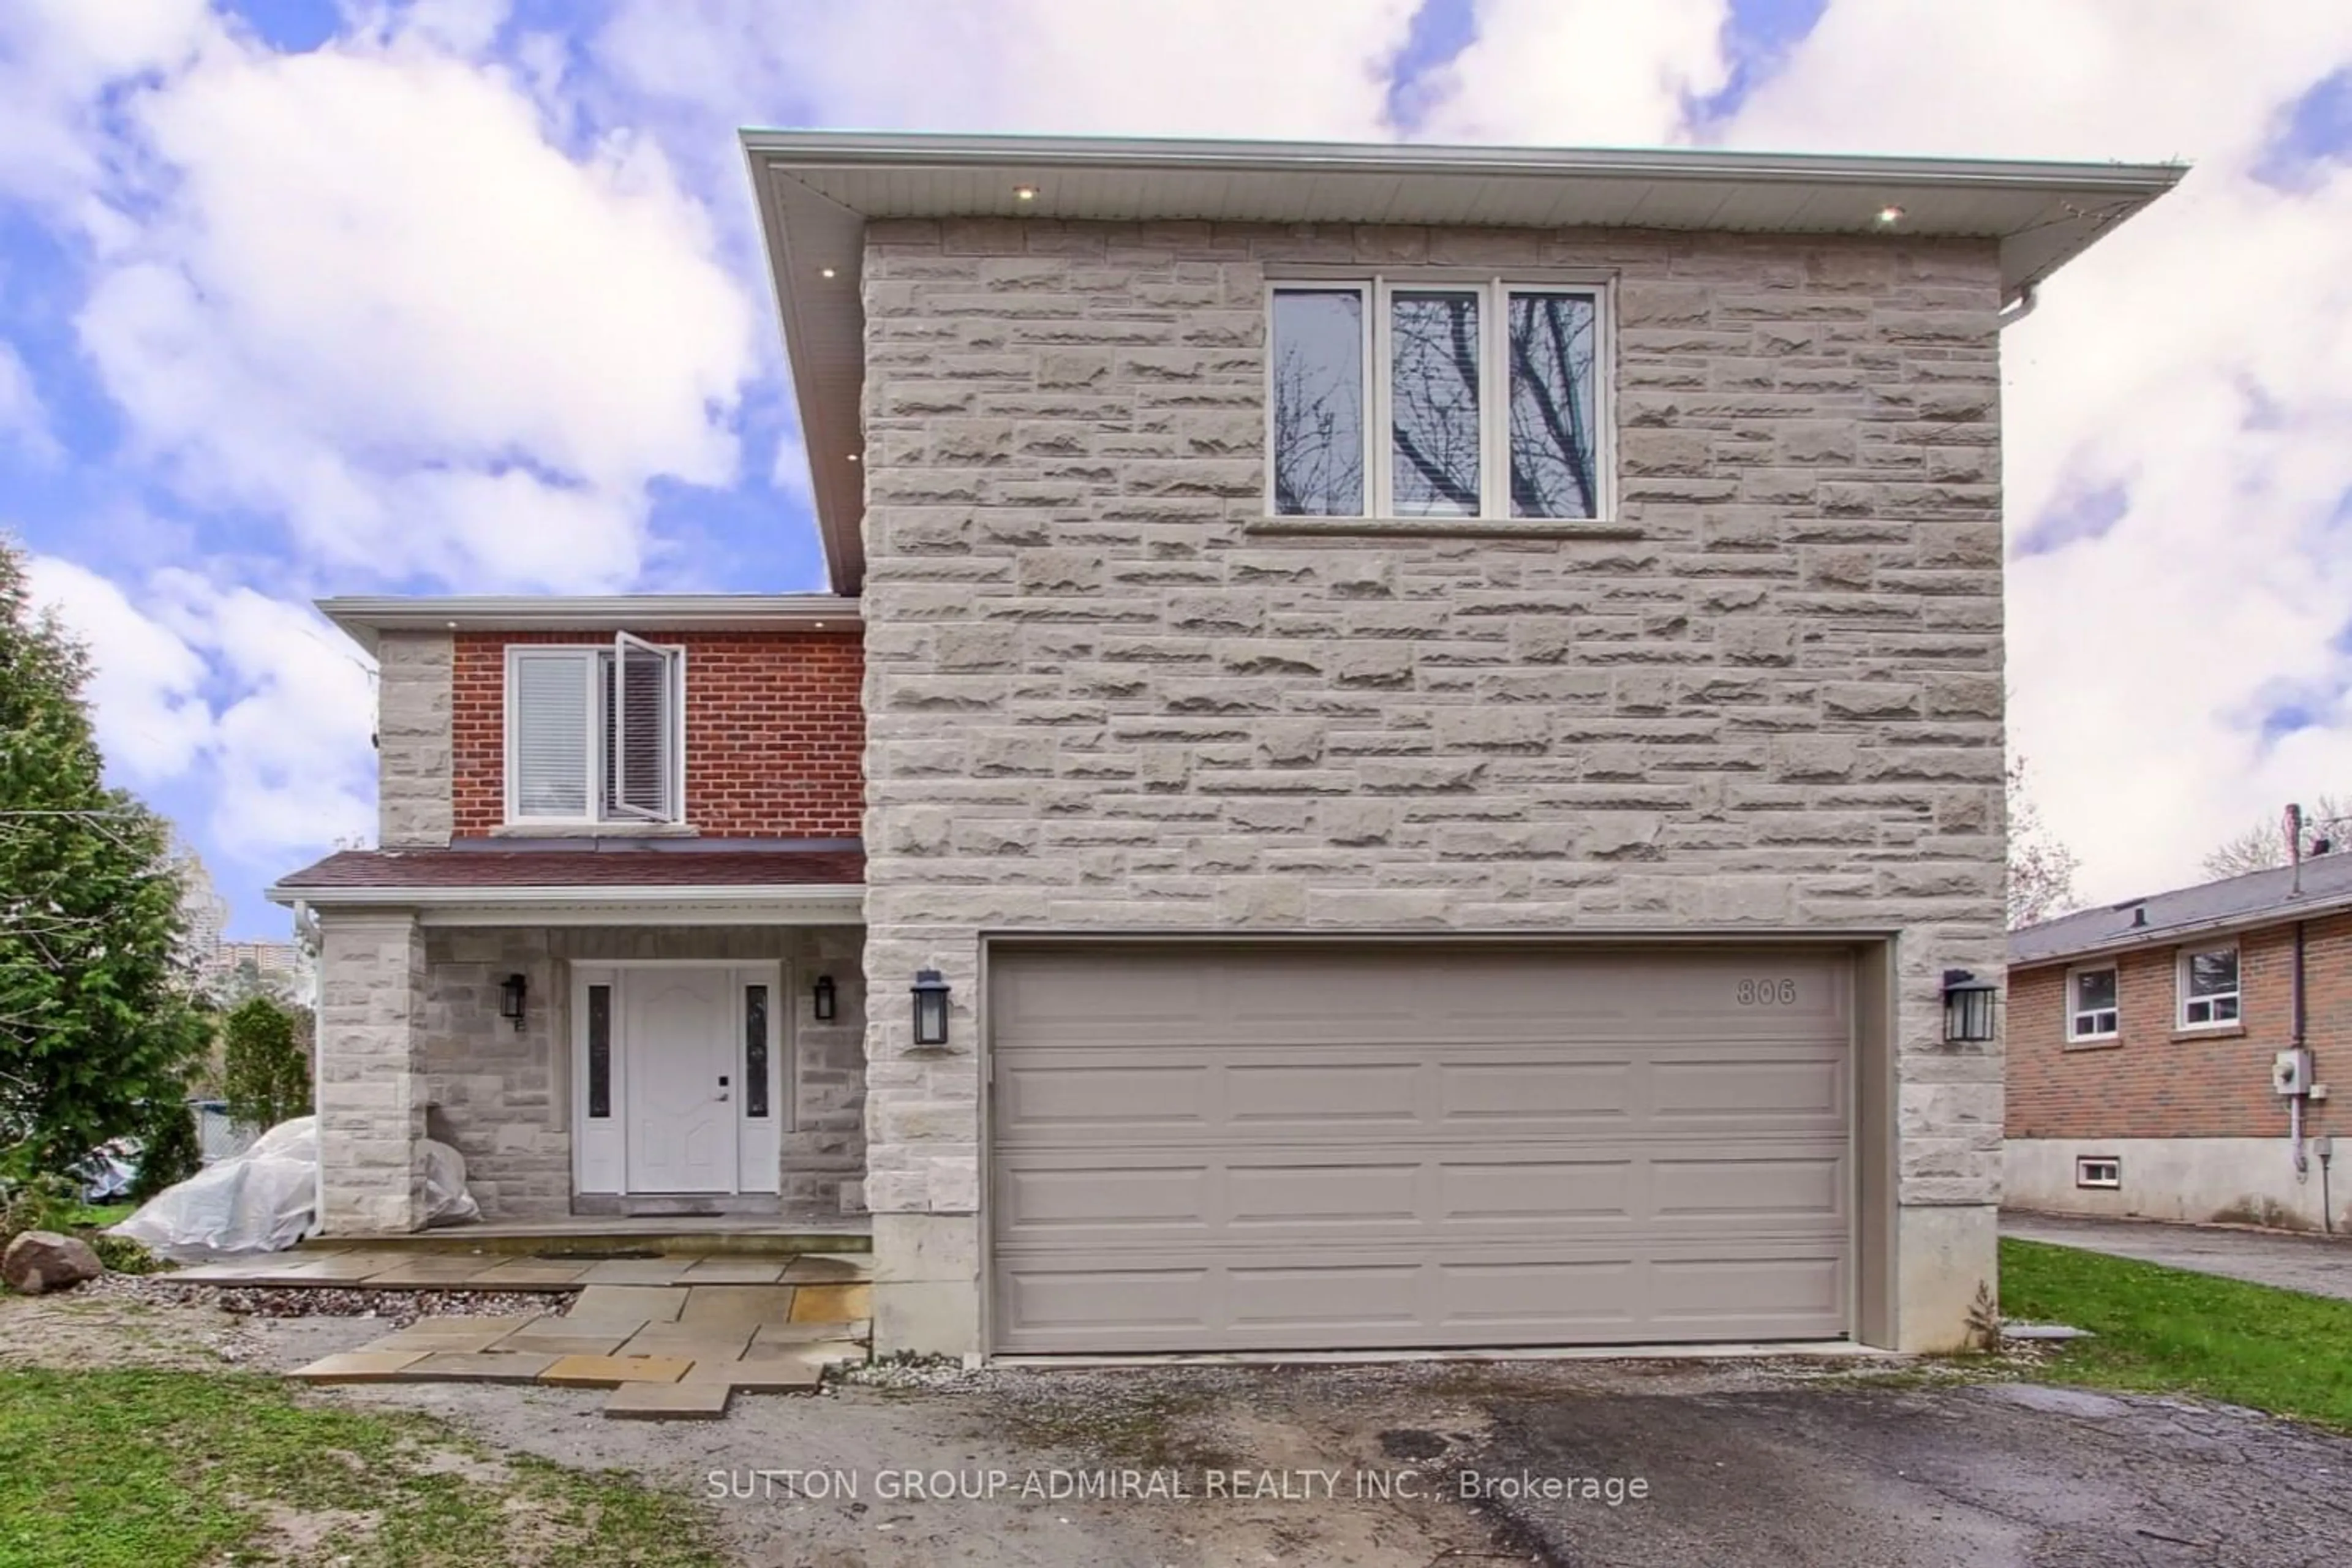 Home with brick exterior material for 806 Magnolia Ave, Newmarket Ontario L3Y 3C7